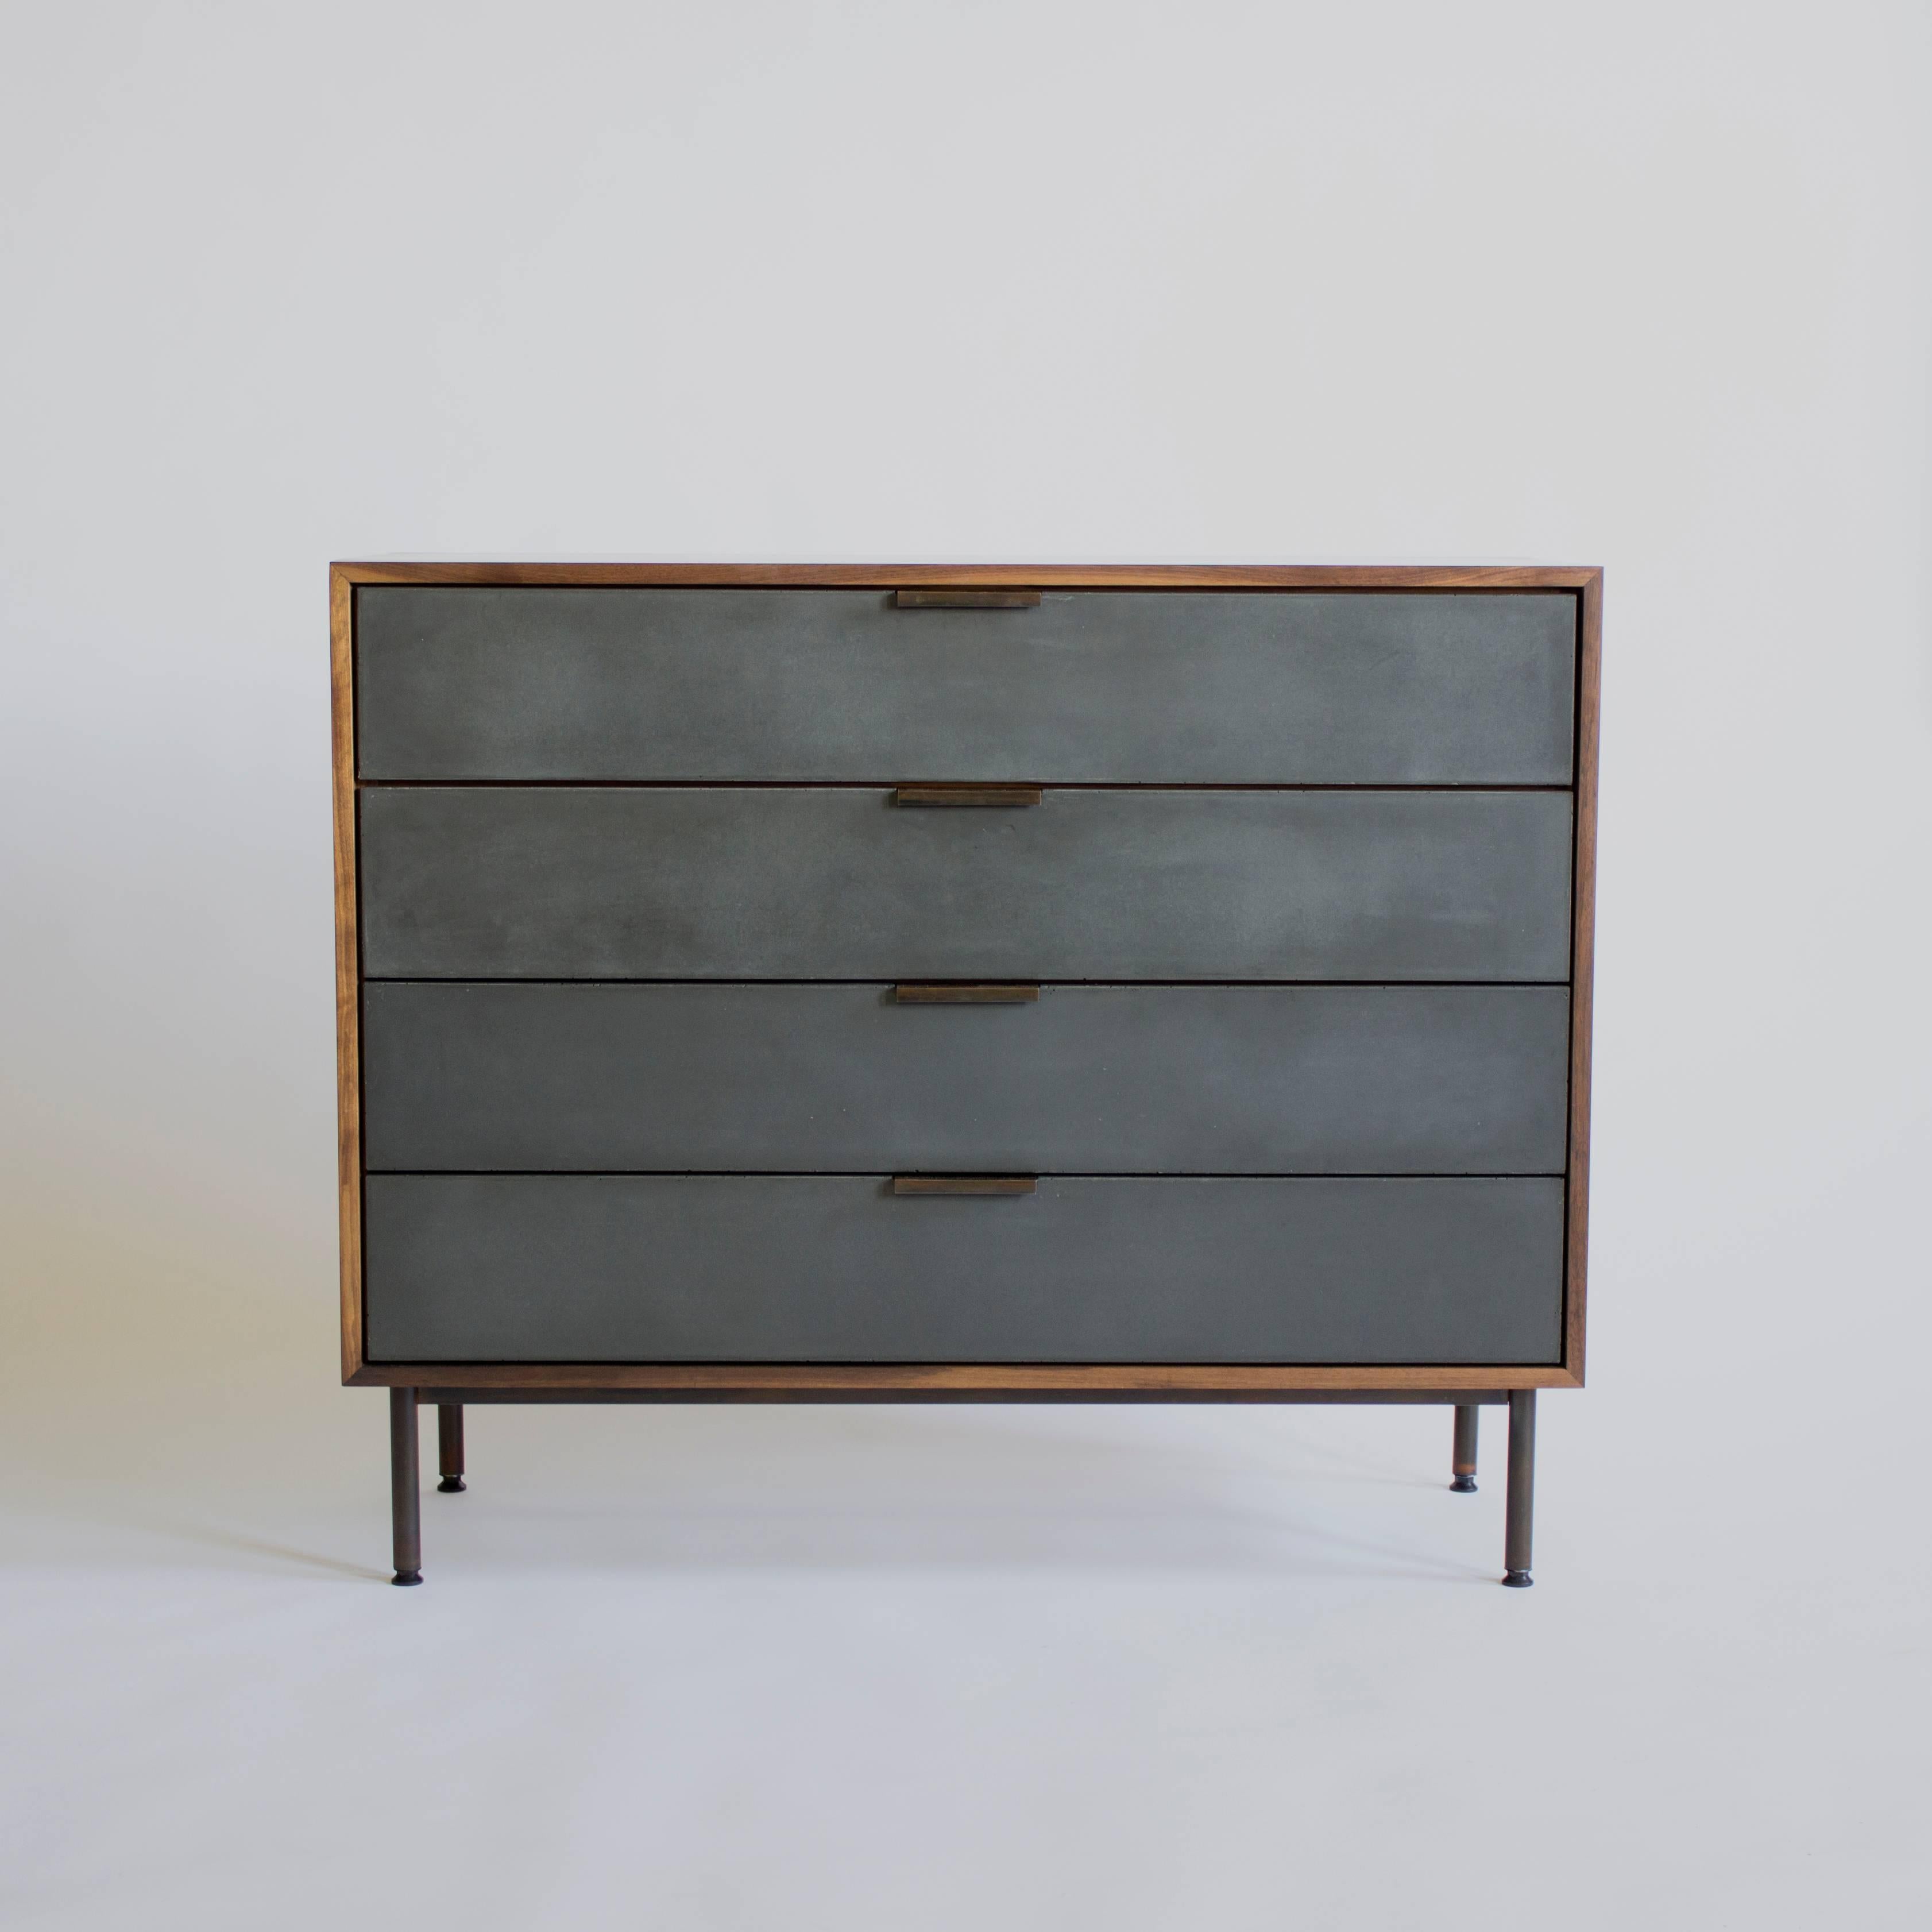 Ira dresser- 
Solid wood case / concrete drawer fronts / solid wood dovetailed drawers / bronzed metal base and pulls

Optional walnut (shown) or maple case.